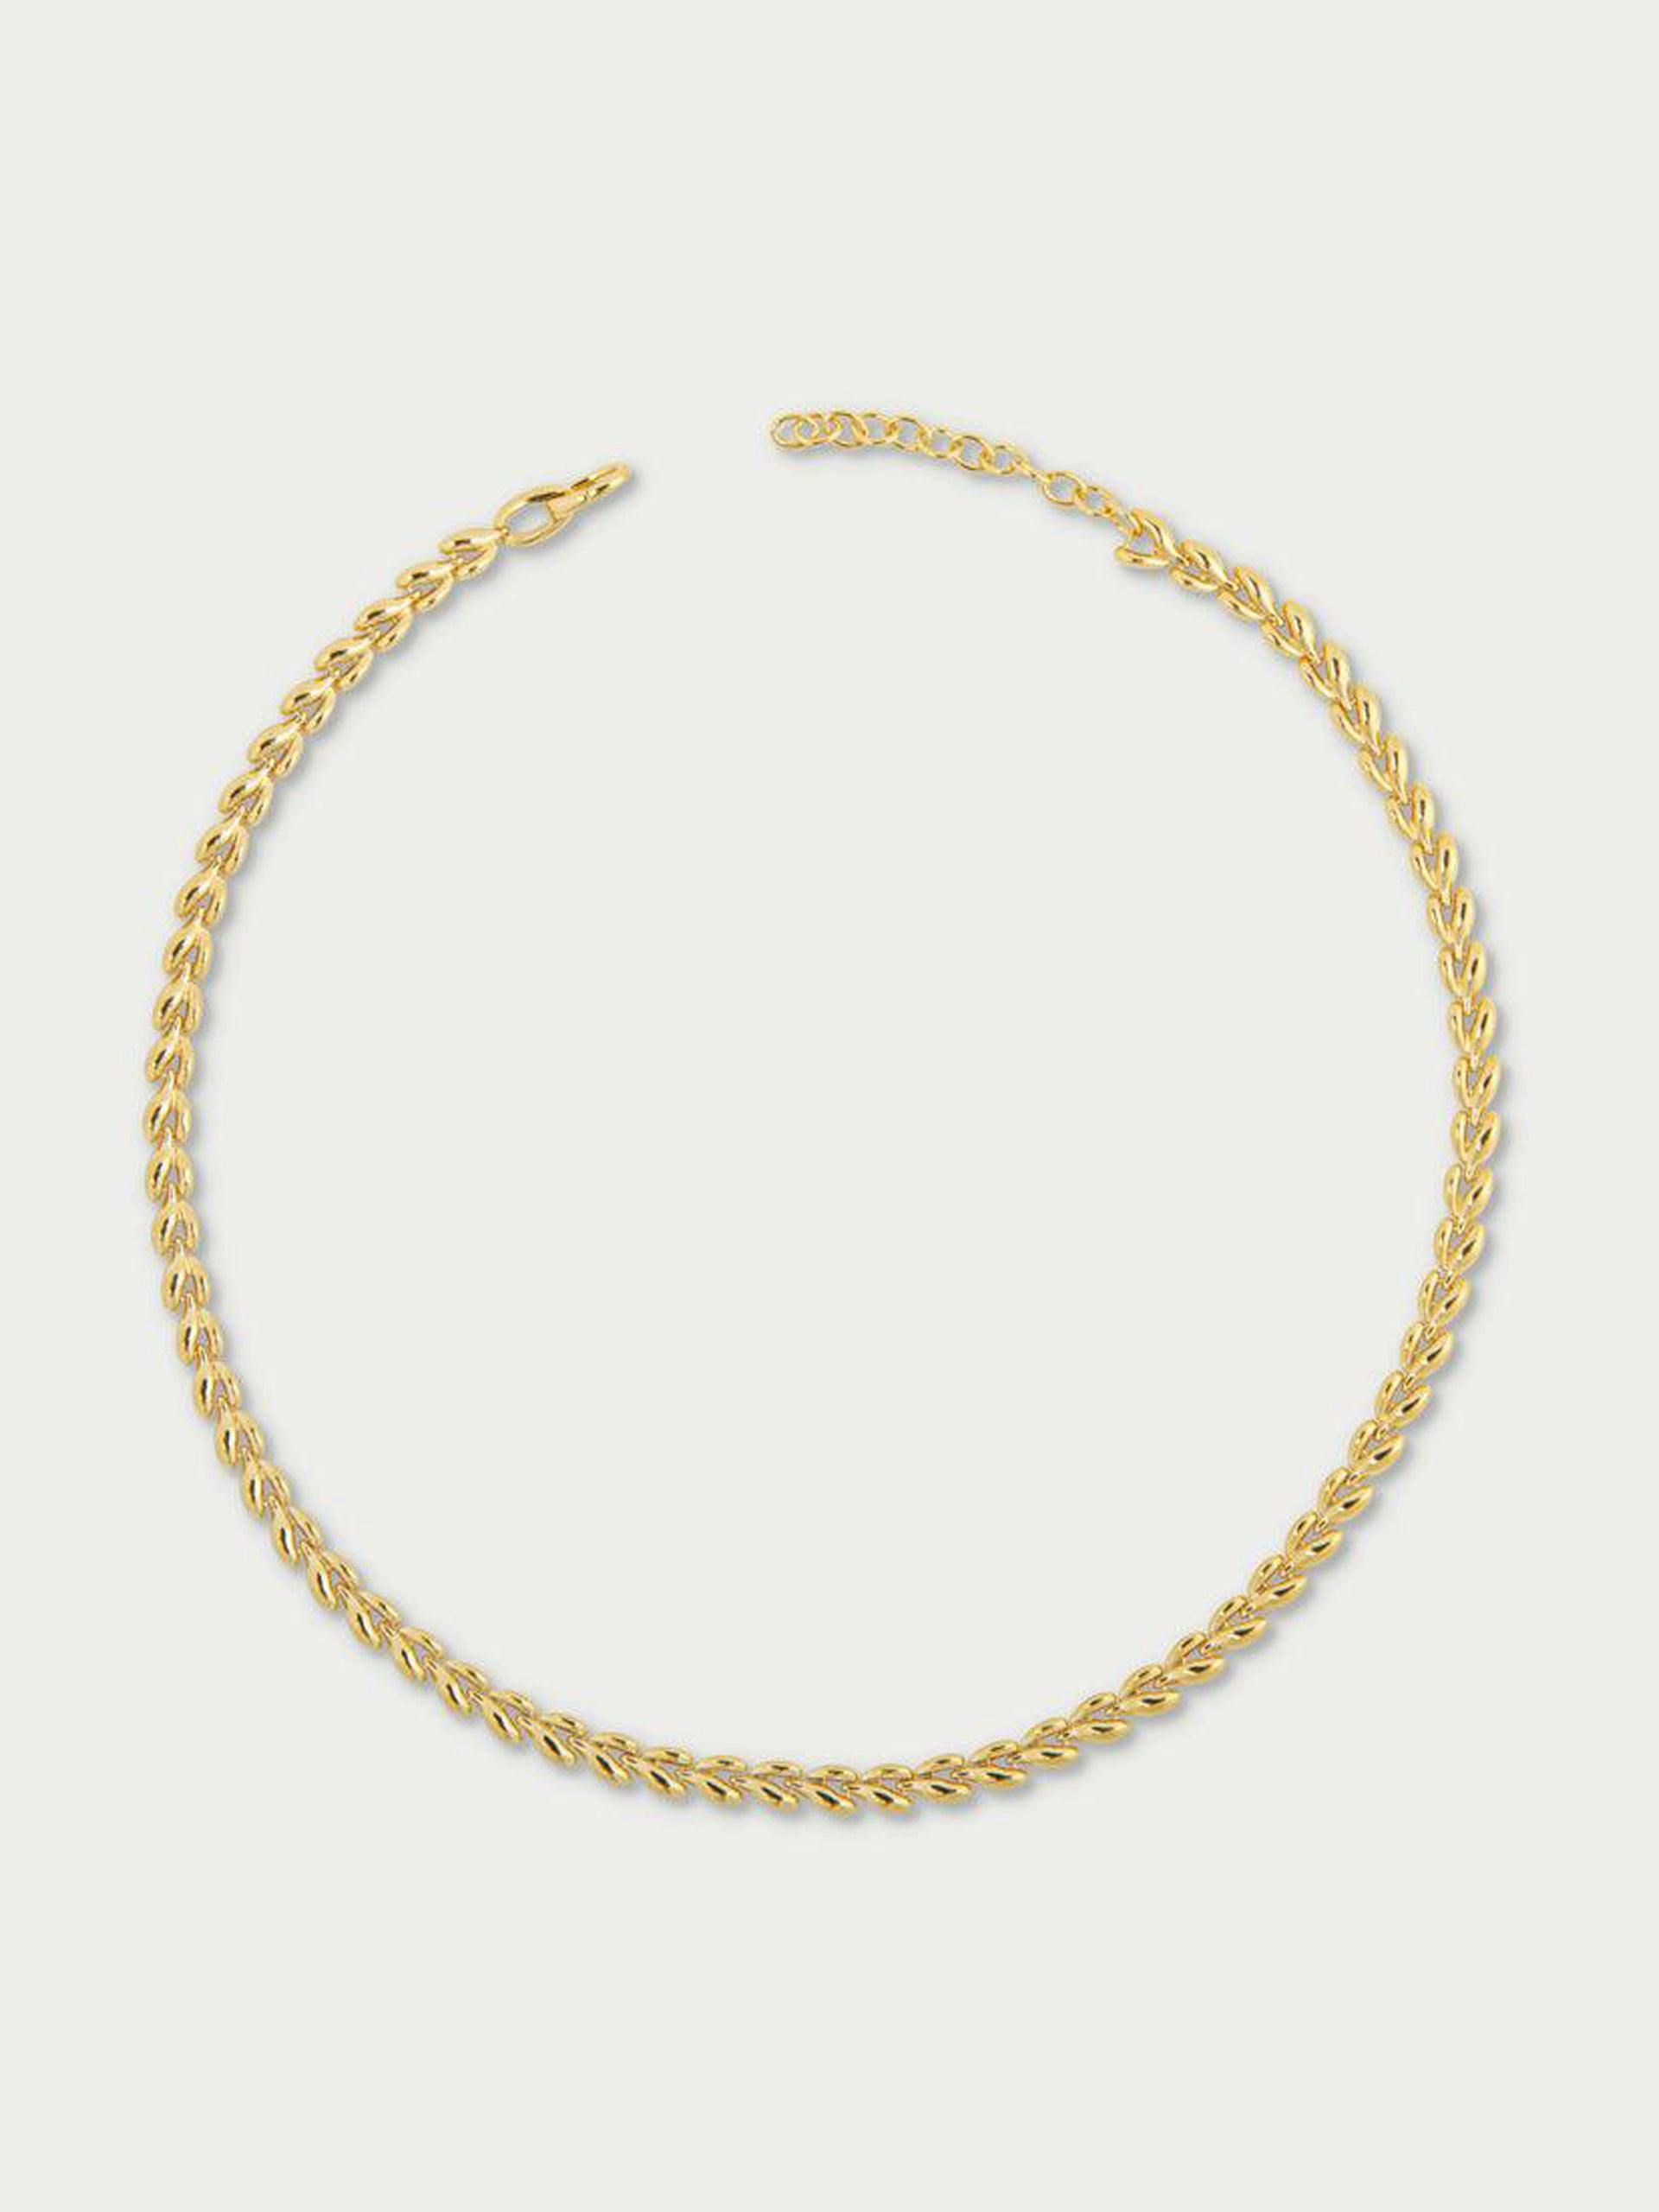 The Fishbone classic chain necklace